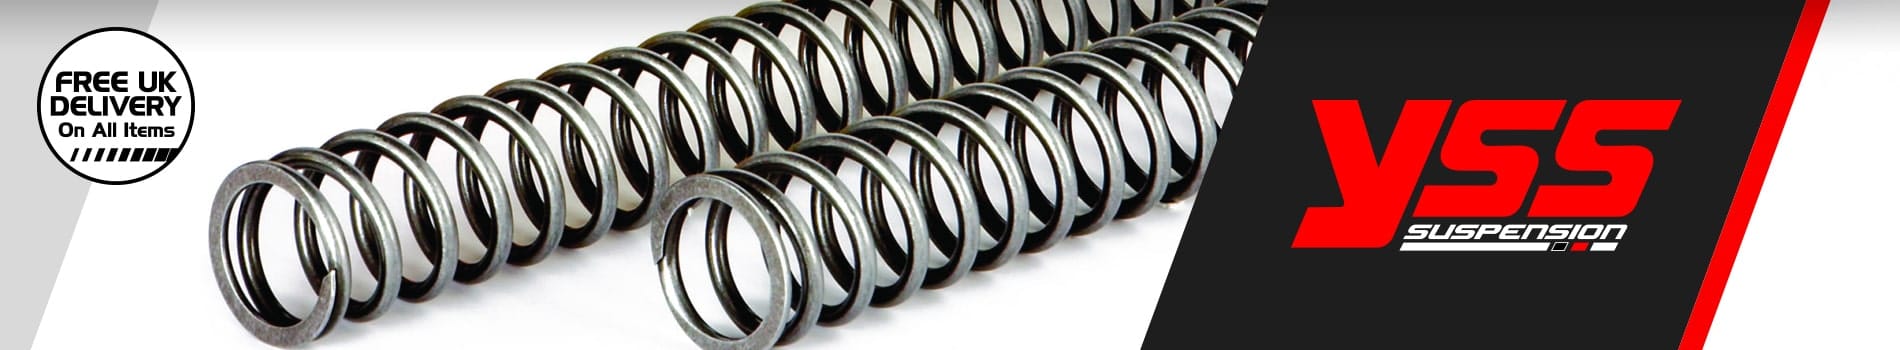 YSS Fork Springs - Free UK Delivery